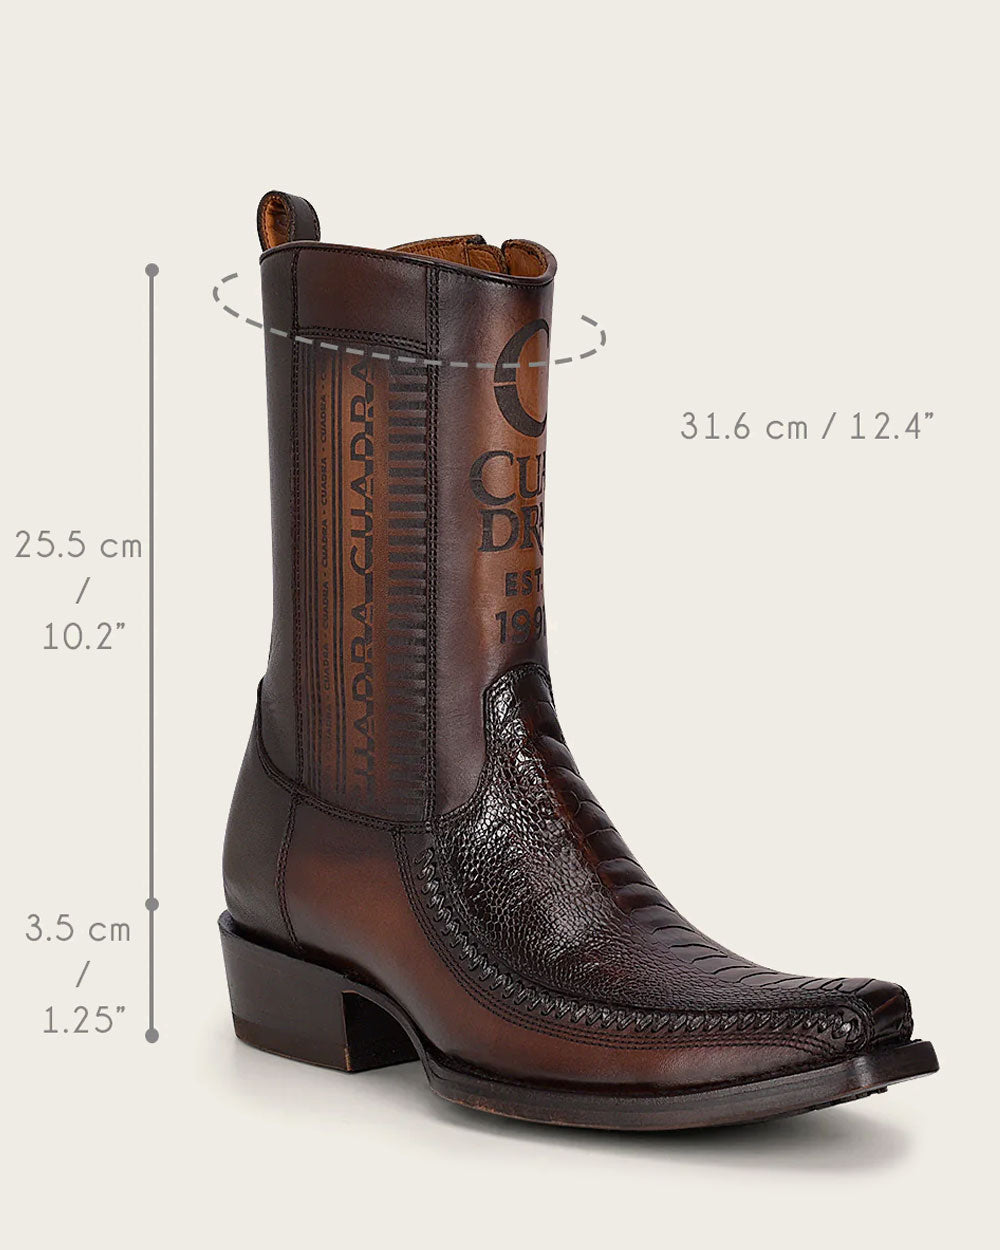 Formal or Night Out: Elevate your look with Cuadra's traditional boots. 